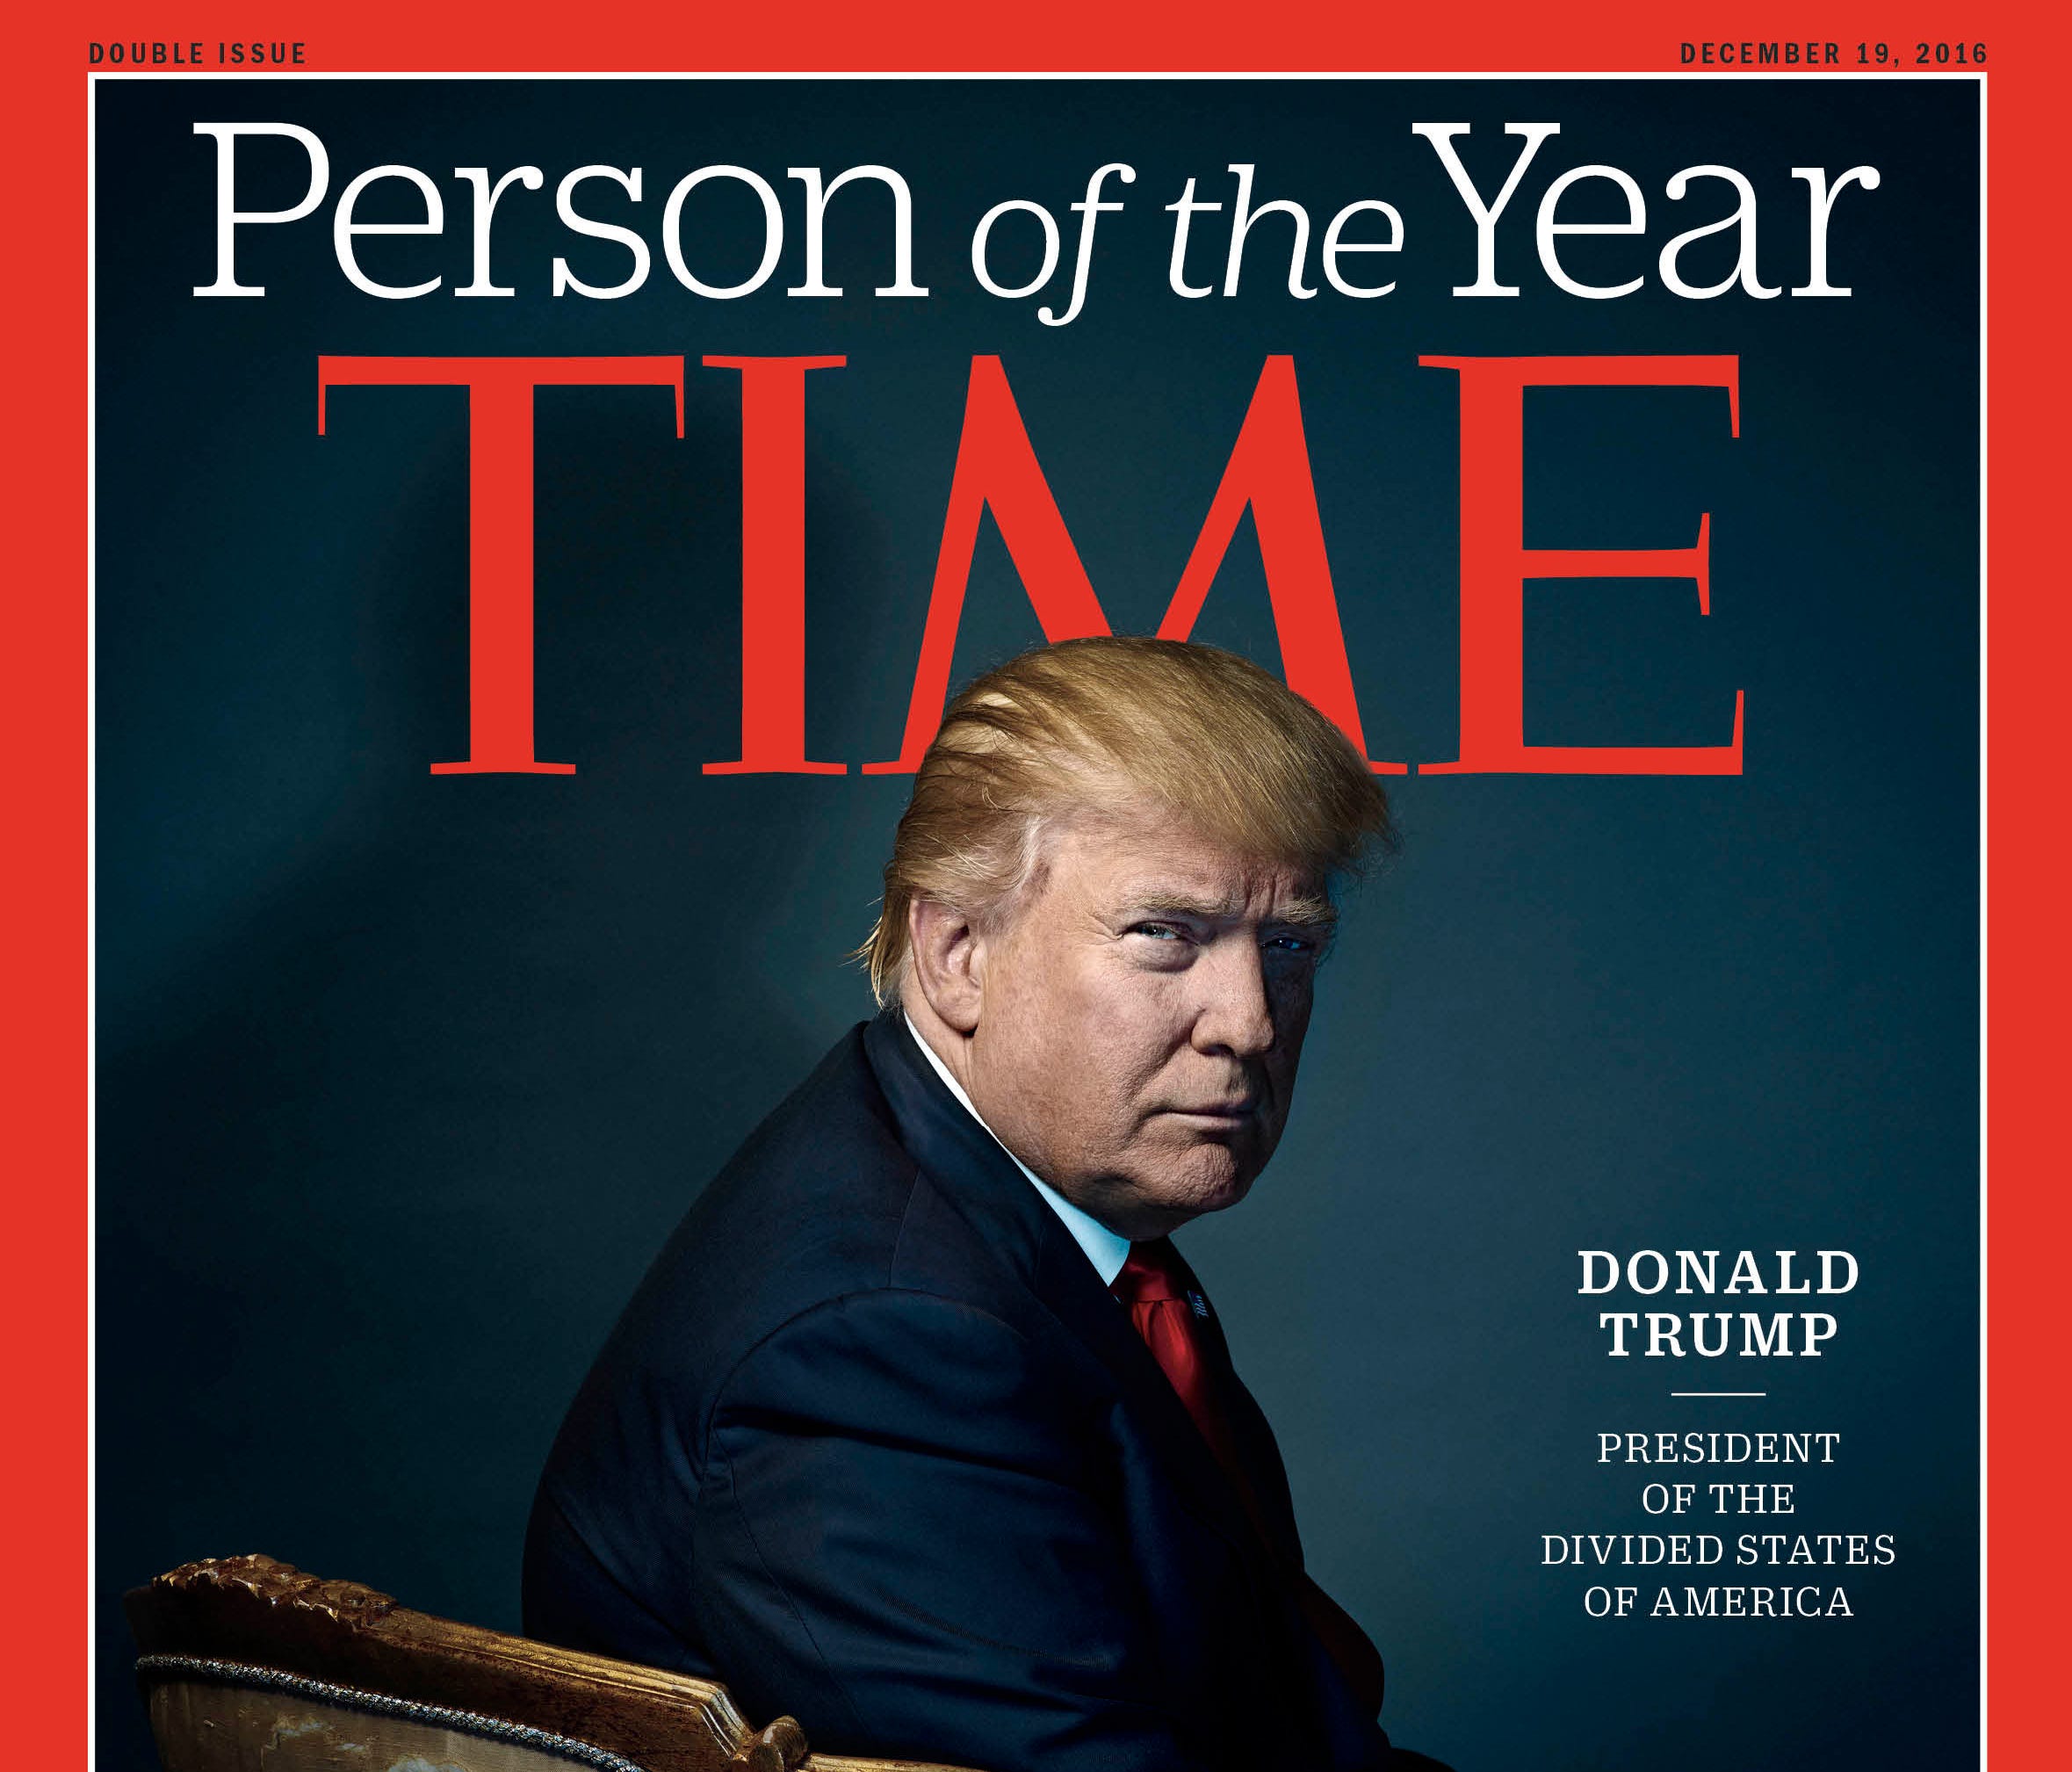 File photo supplied in Dec. 2016 by Time Inc. shows then-U.S. President-elect Donald Trump on the cover of Time Magazine's annual person-of-the-year edition.